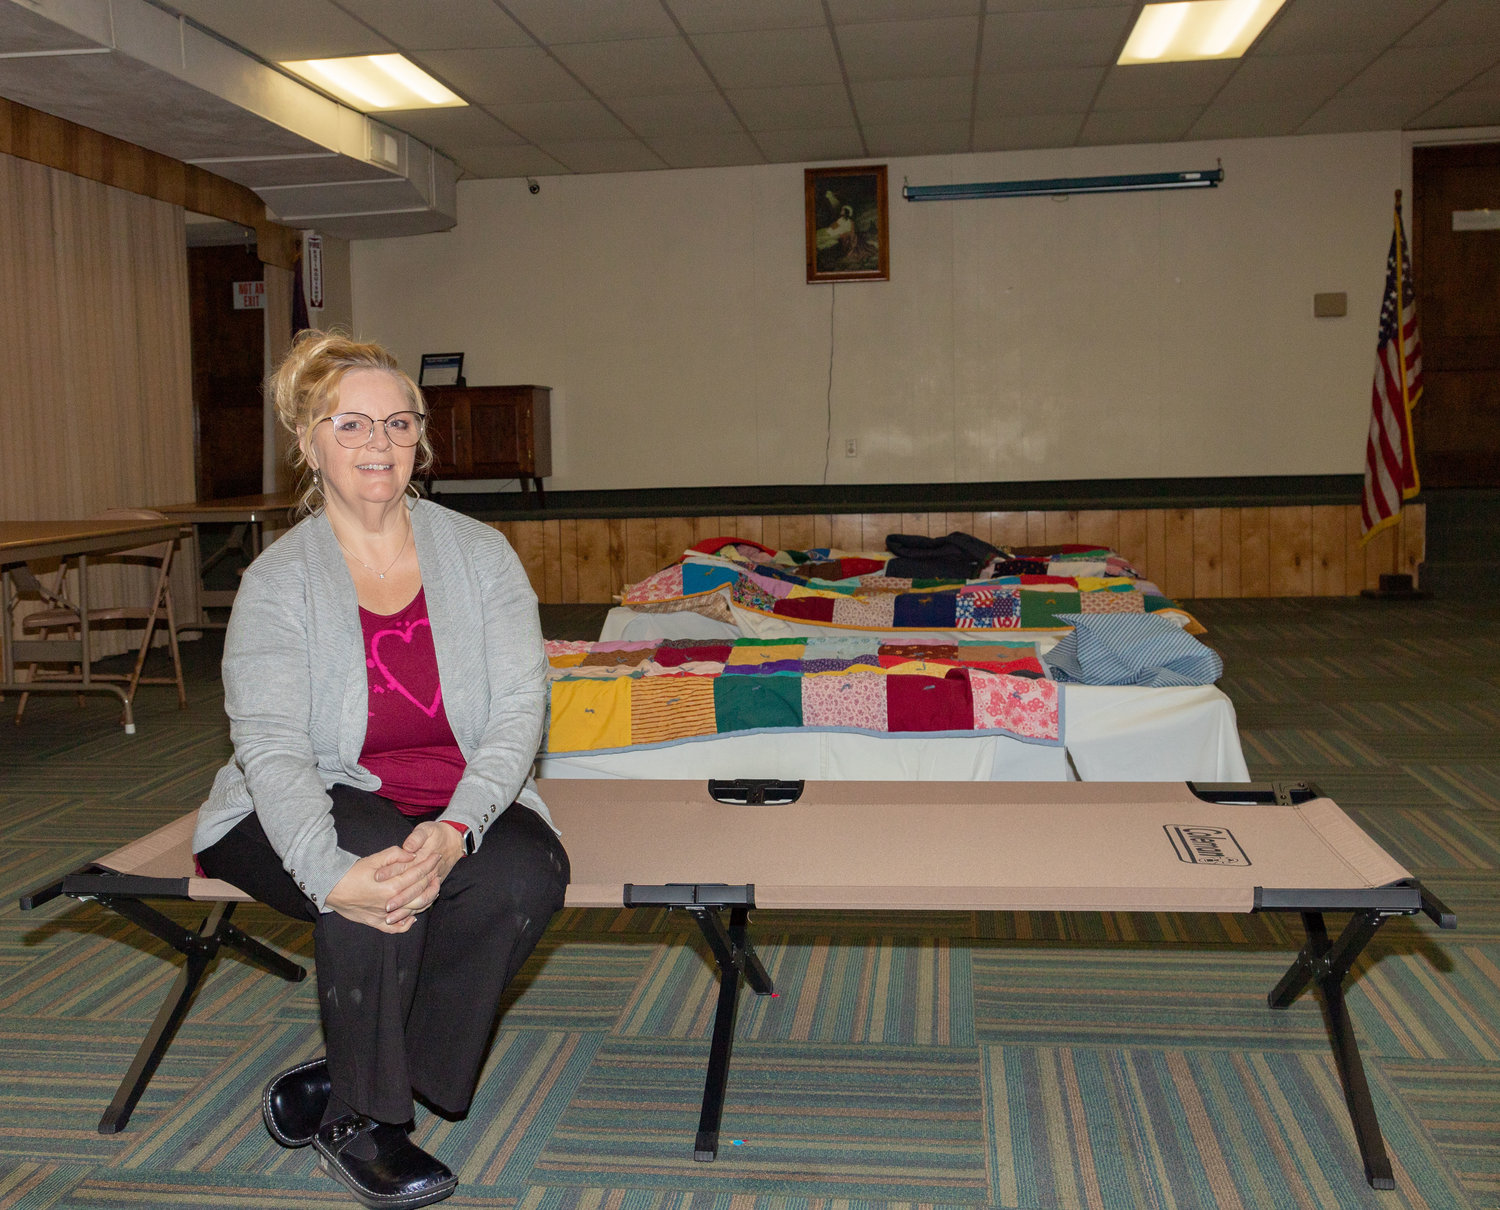 Paula Heath, a coordinator of Room at the Inn, sits on one of the cots prepared for guests at the over-night warming center last week. Heath would like the center to open more often, but she doesn’t have enough volunteers.